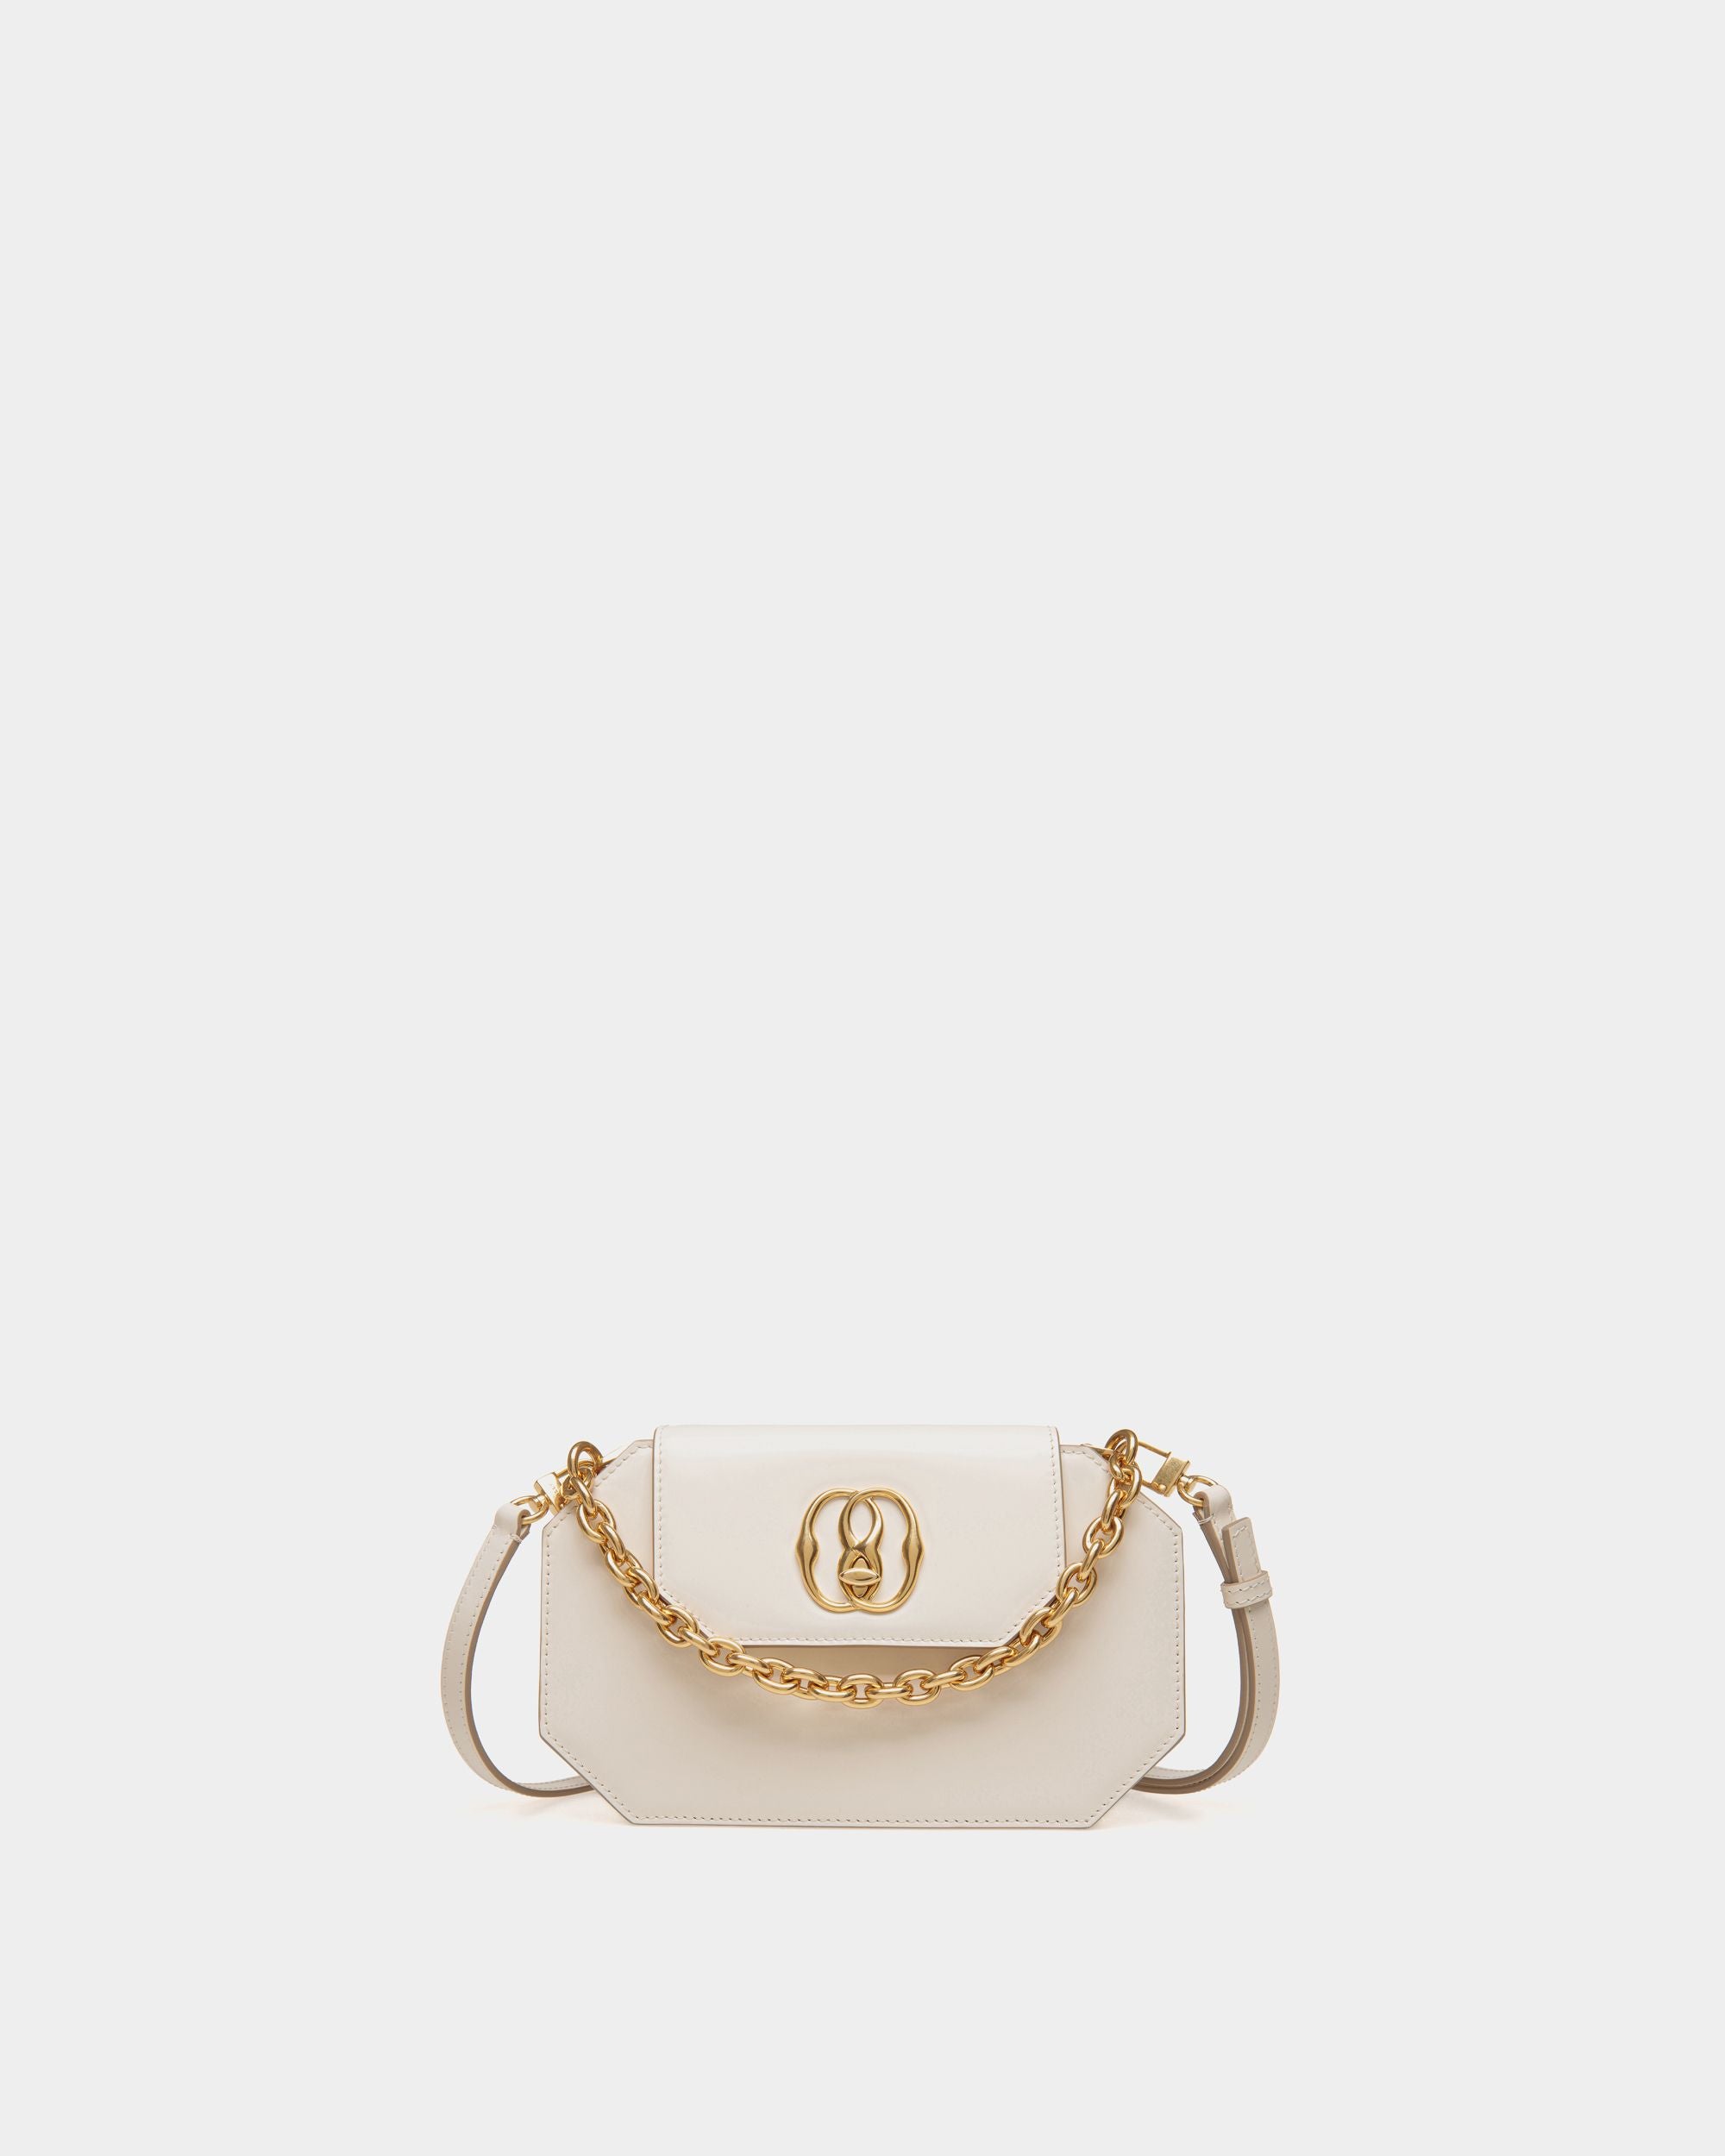 Emblem | Women's Mini Bag in White Brushed Leather | Bally | Still Life Front